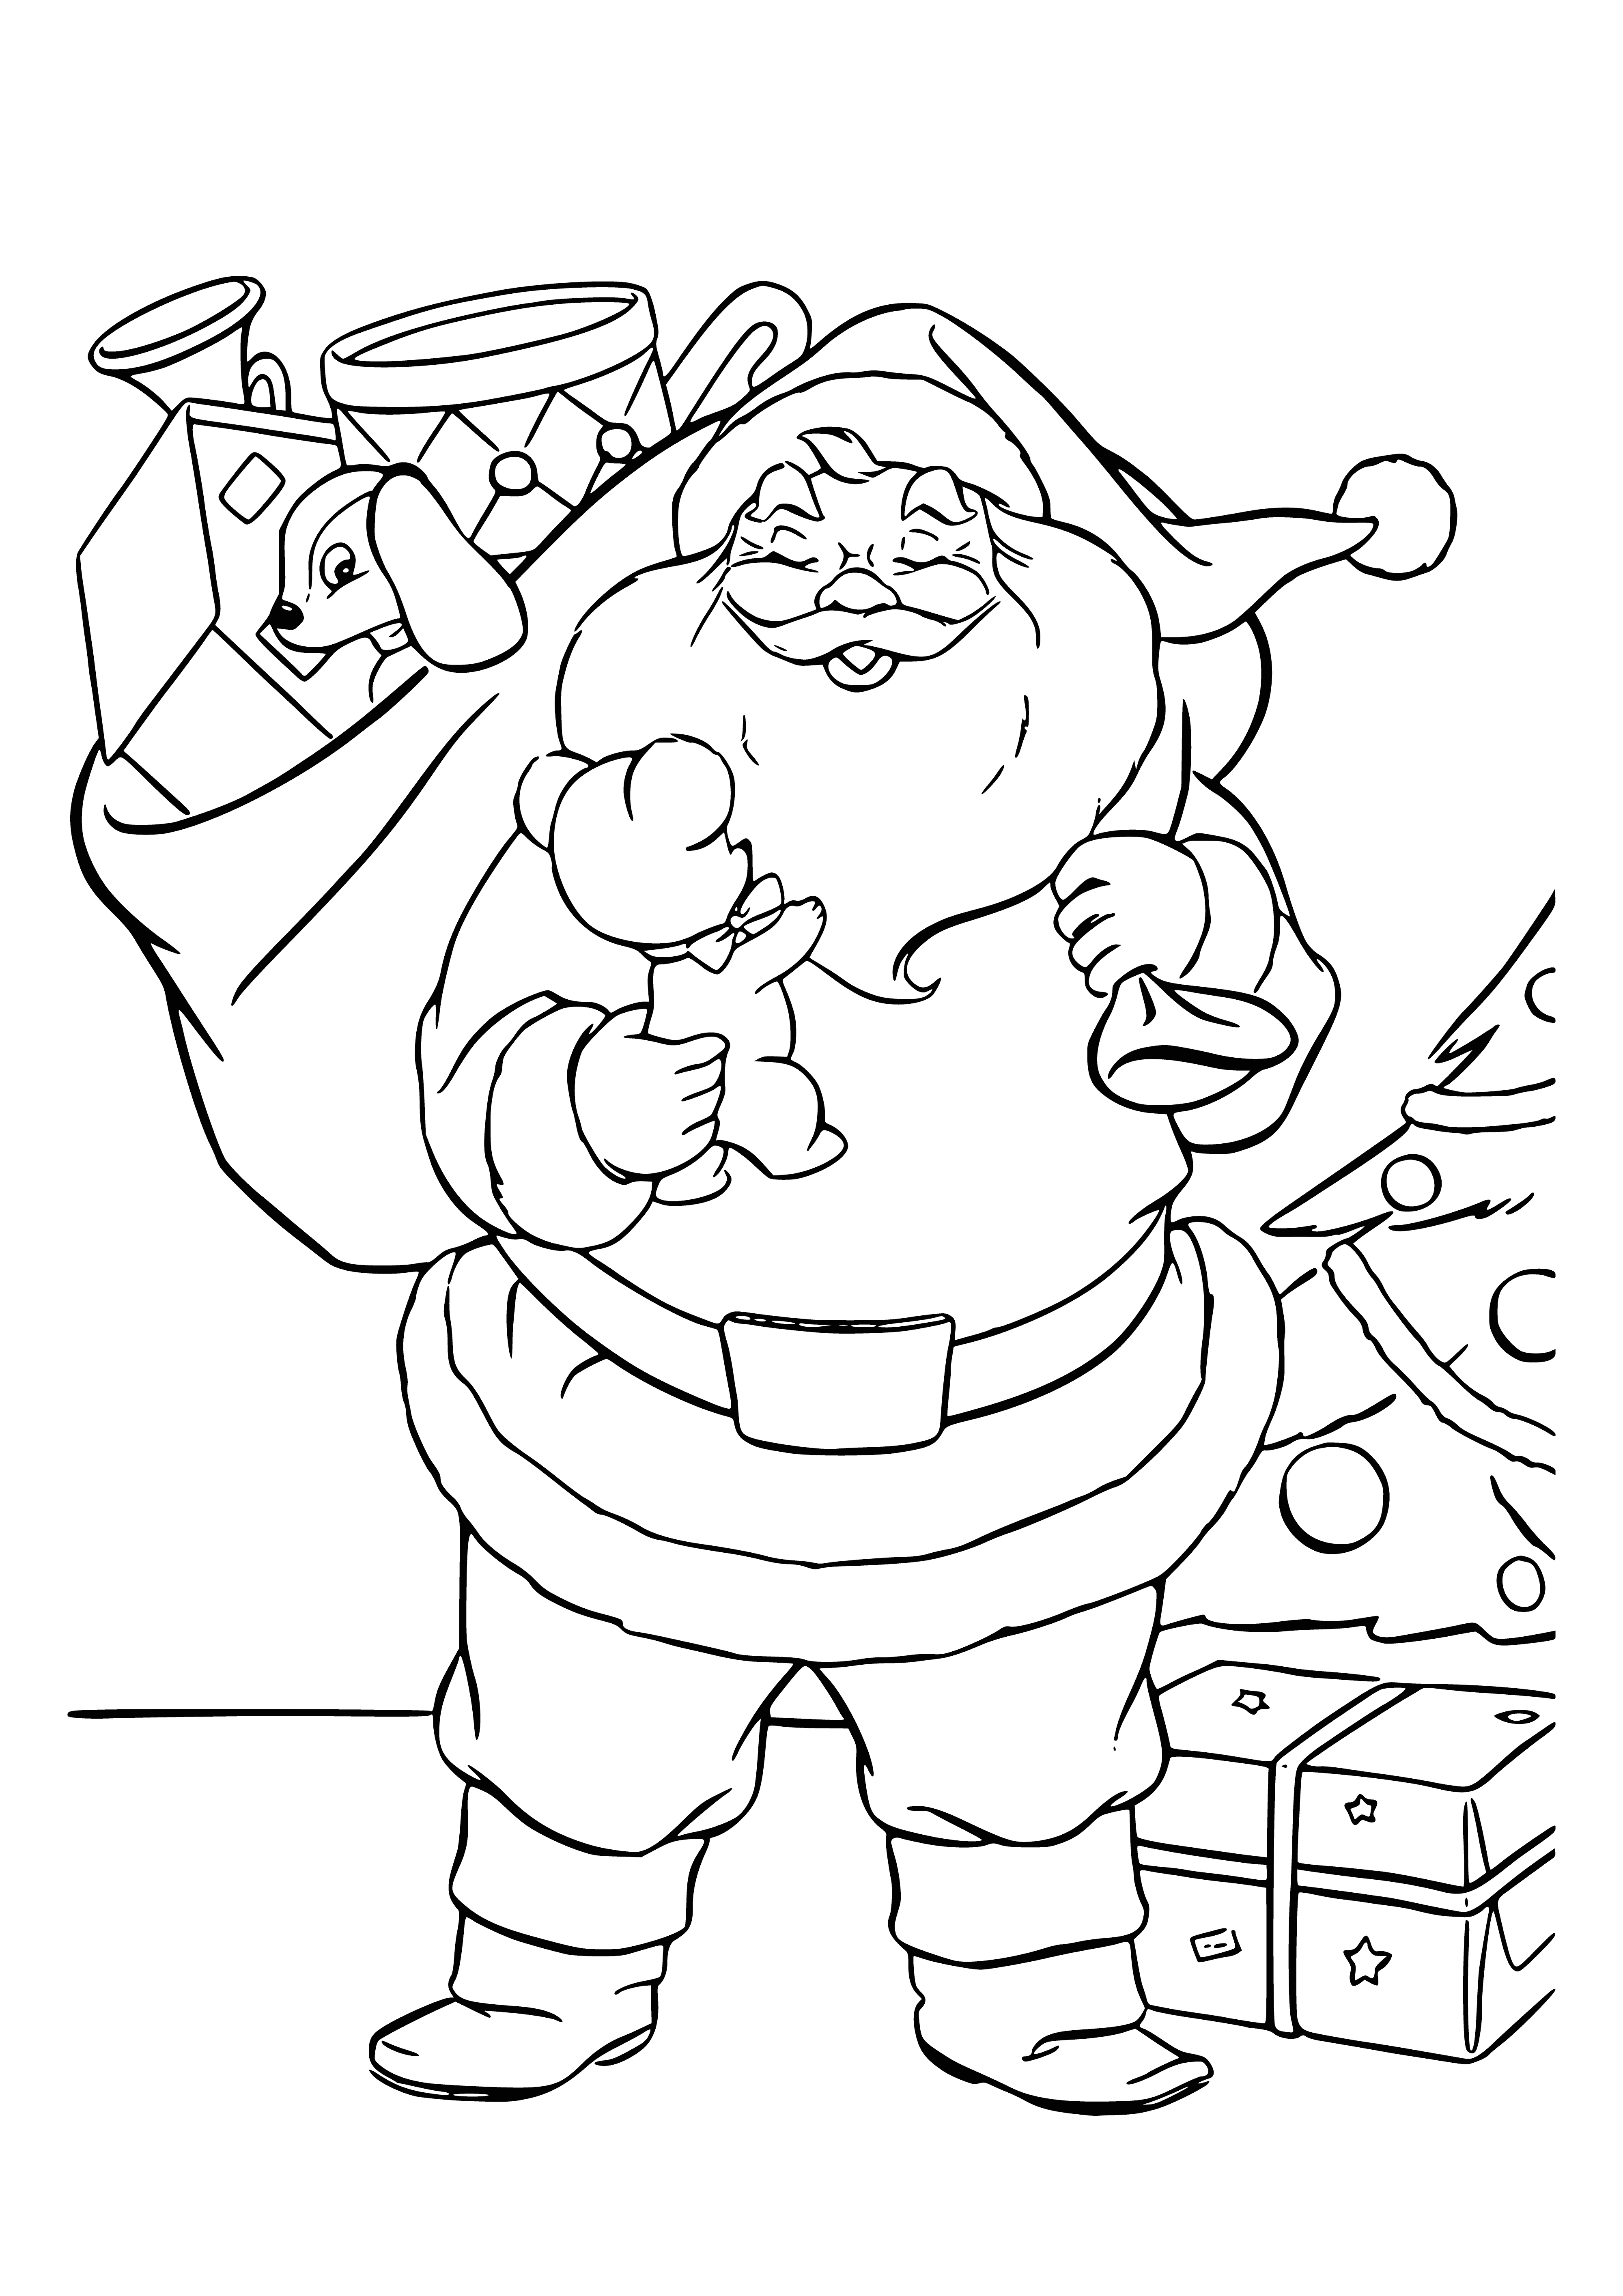 coloring page: Coloring page of Santa Claus with Christmas tree and presents. #Christmas #Coloring